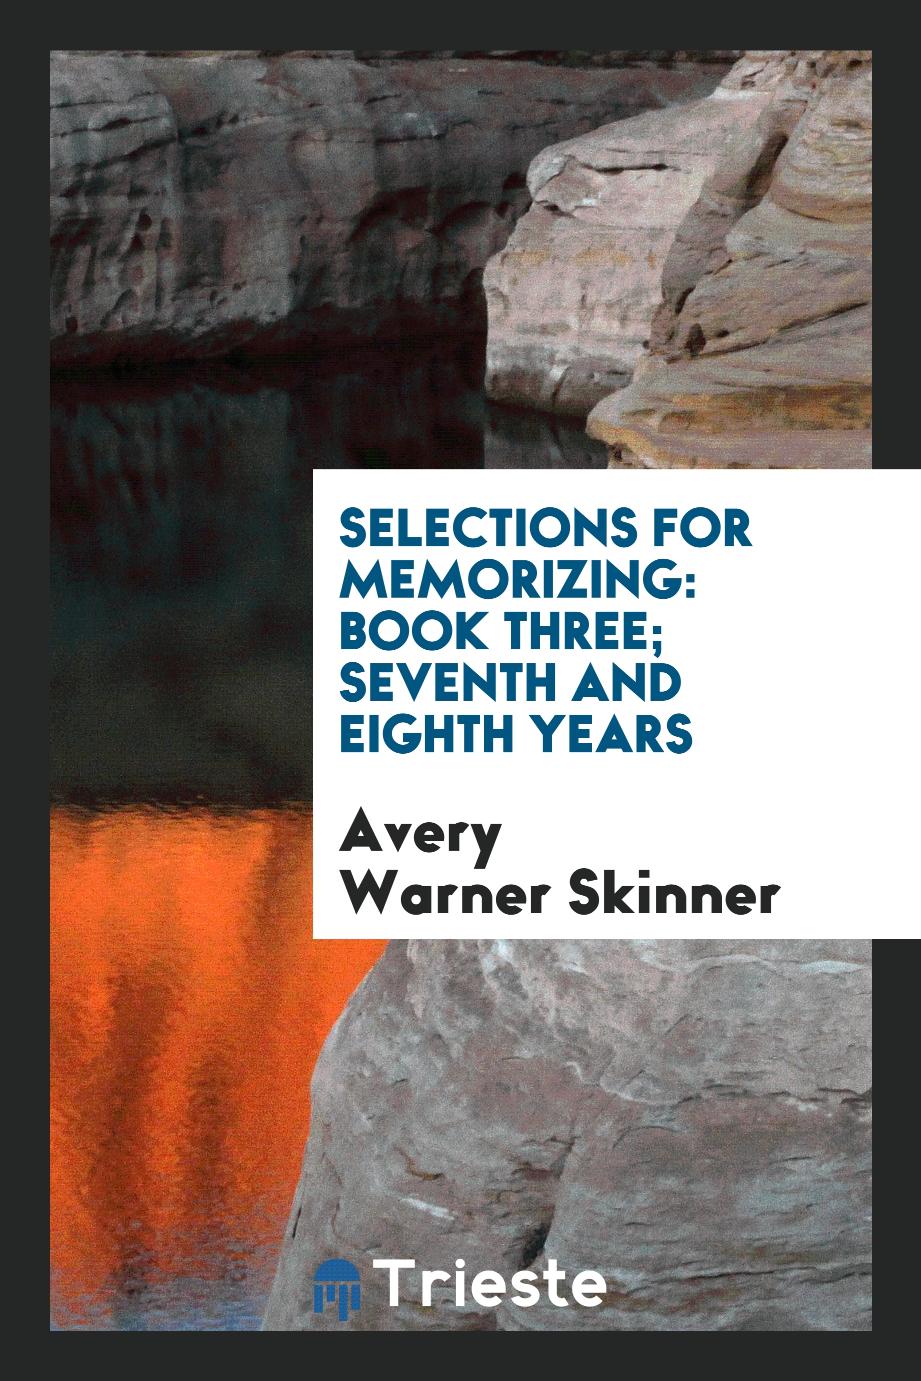 Selections for Memorizing: Book Three; Seventh and Eighth Years